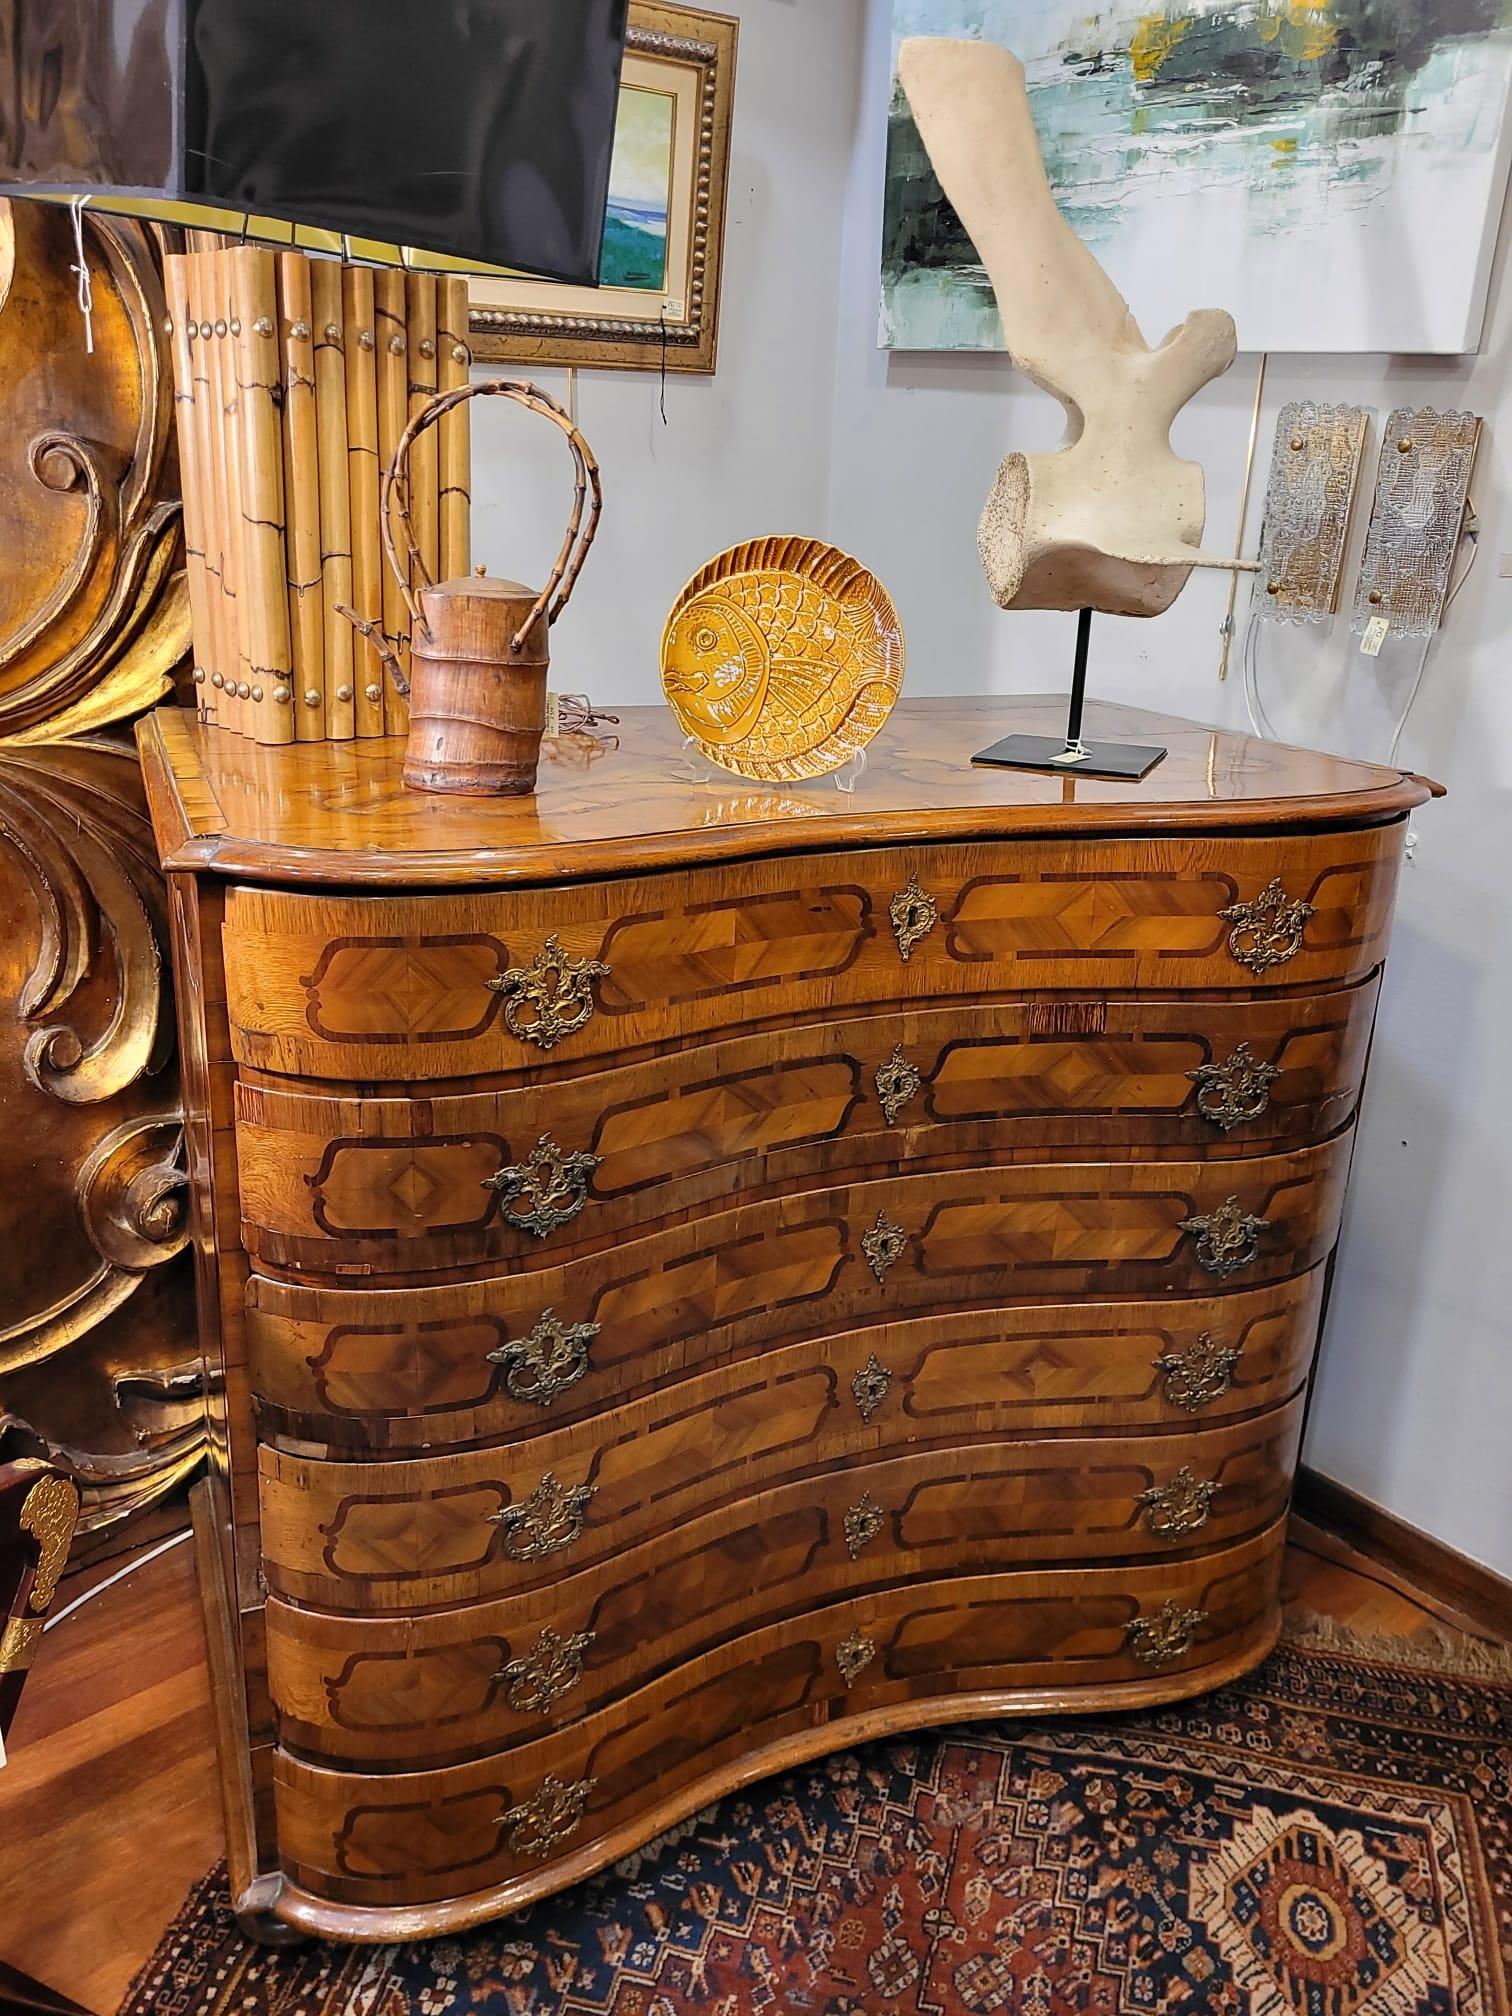 One of a kind serpentine chest of drawers with marquetry decorations in walnut wood and other precious woods from the Bavarian region of Germany.

Divided into 6 registers, each of them has an undulating shape, characteristic of the comfortable